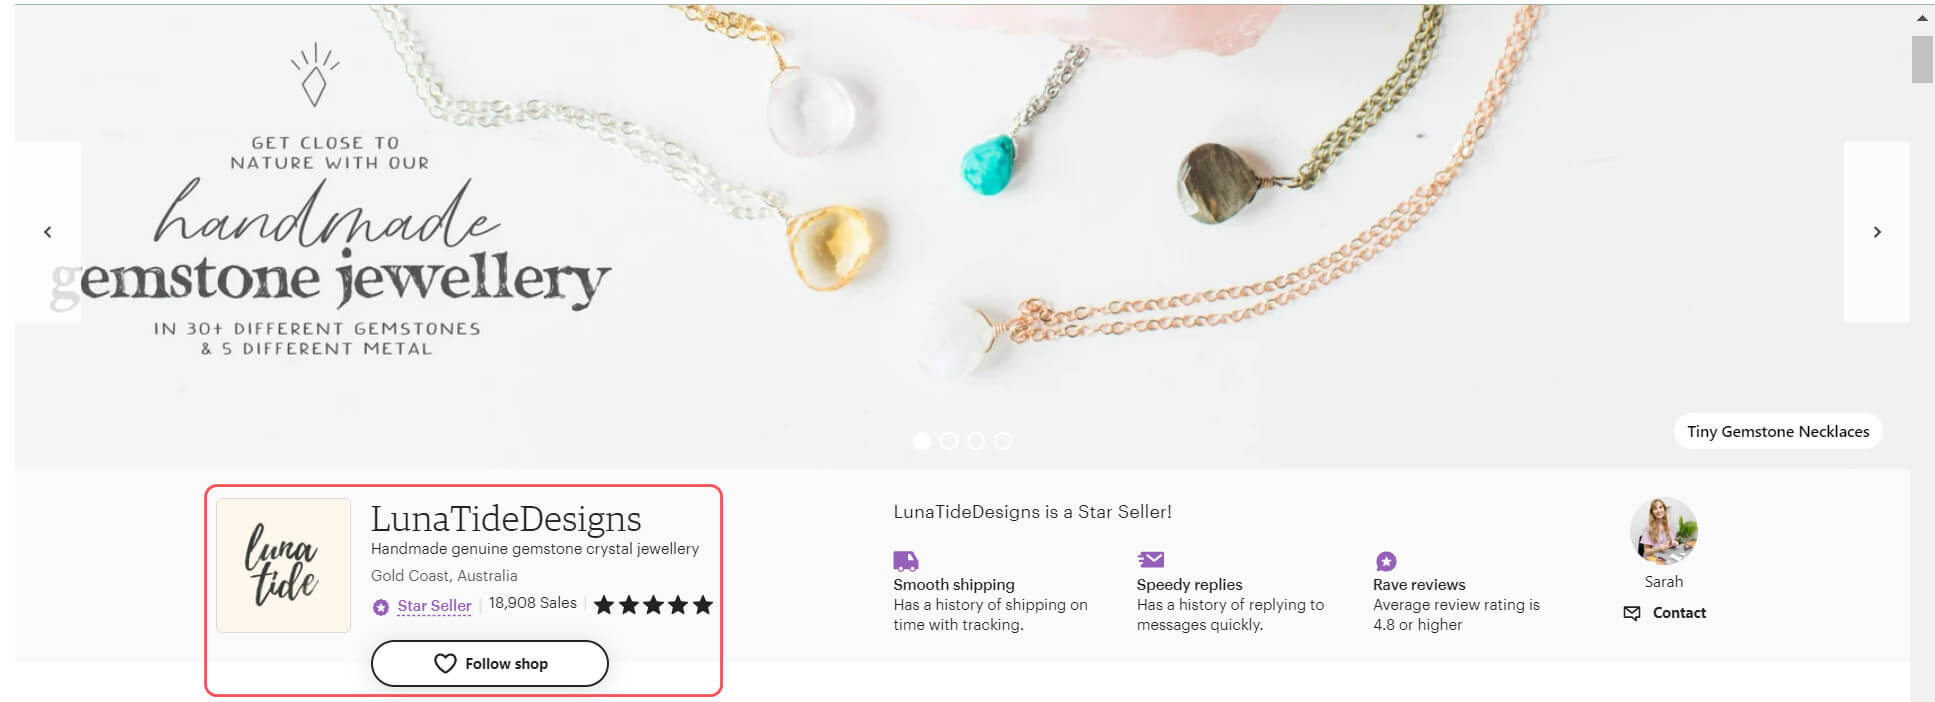 LunaTideDesigns features their jewelry in the cover image and uses their brand font in the shop icon